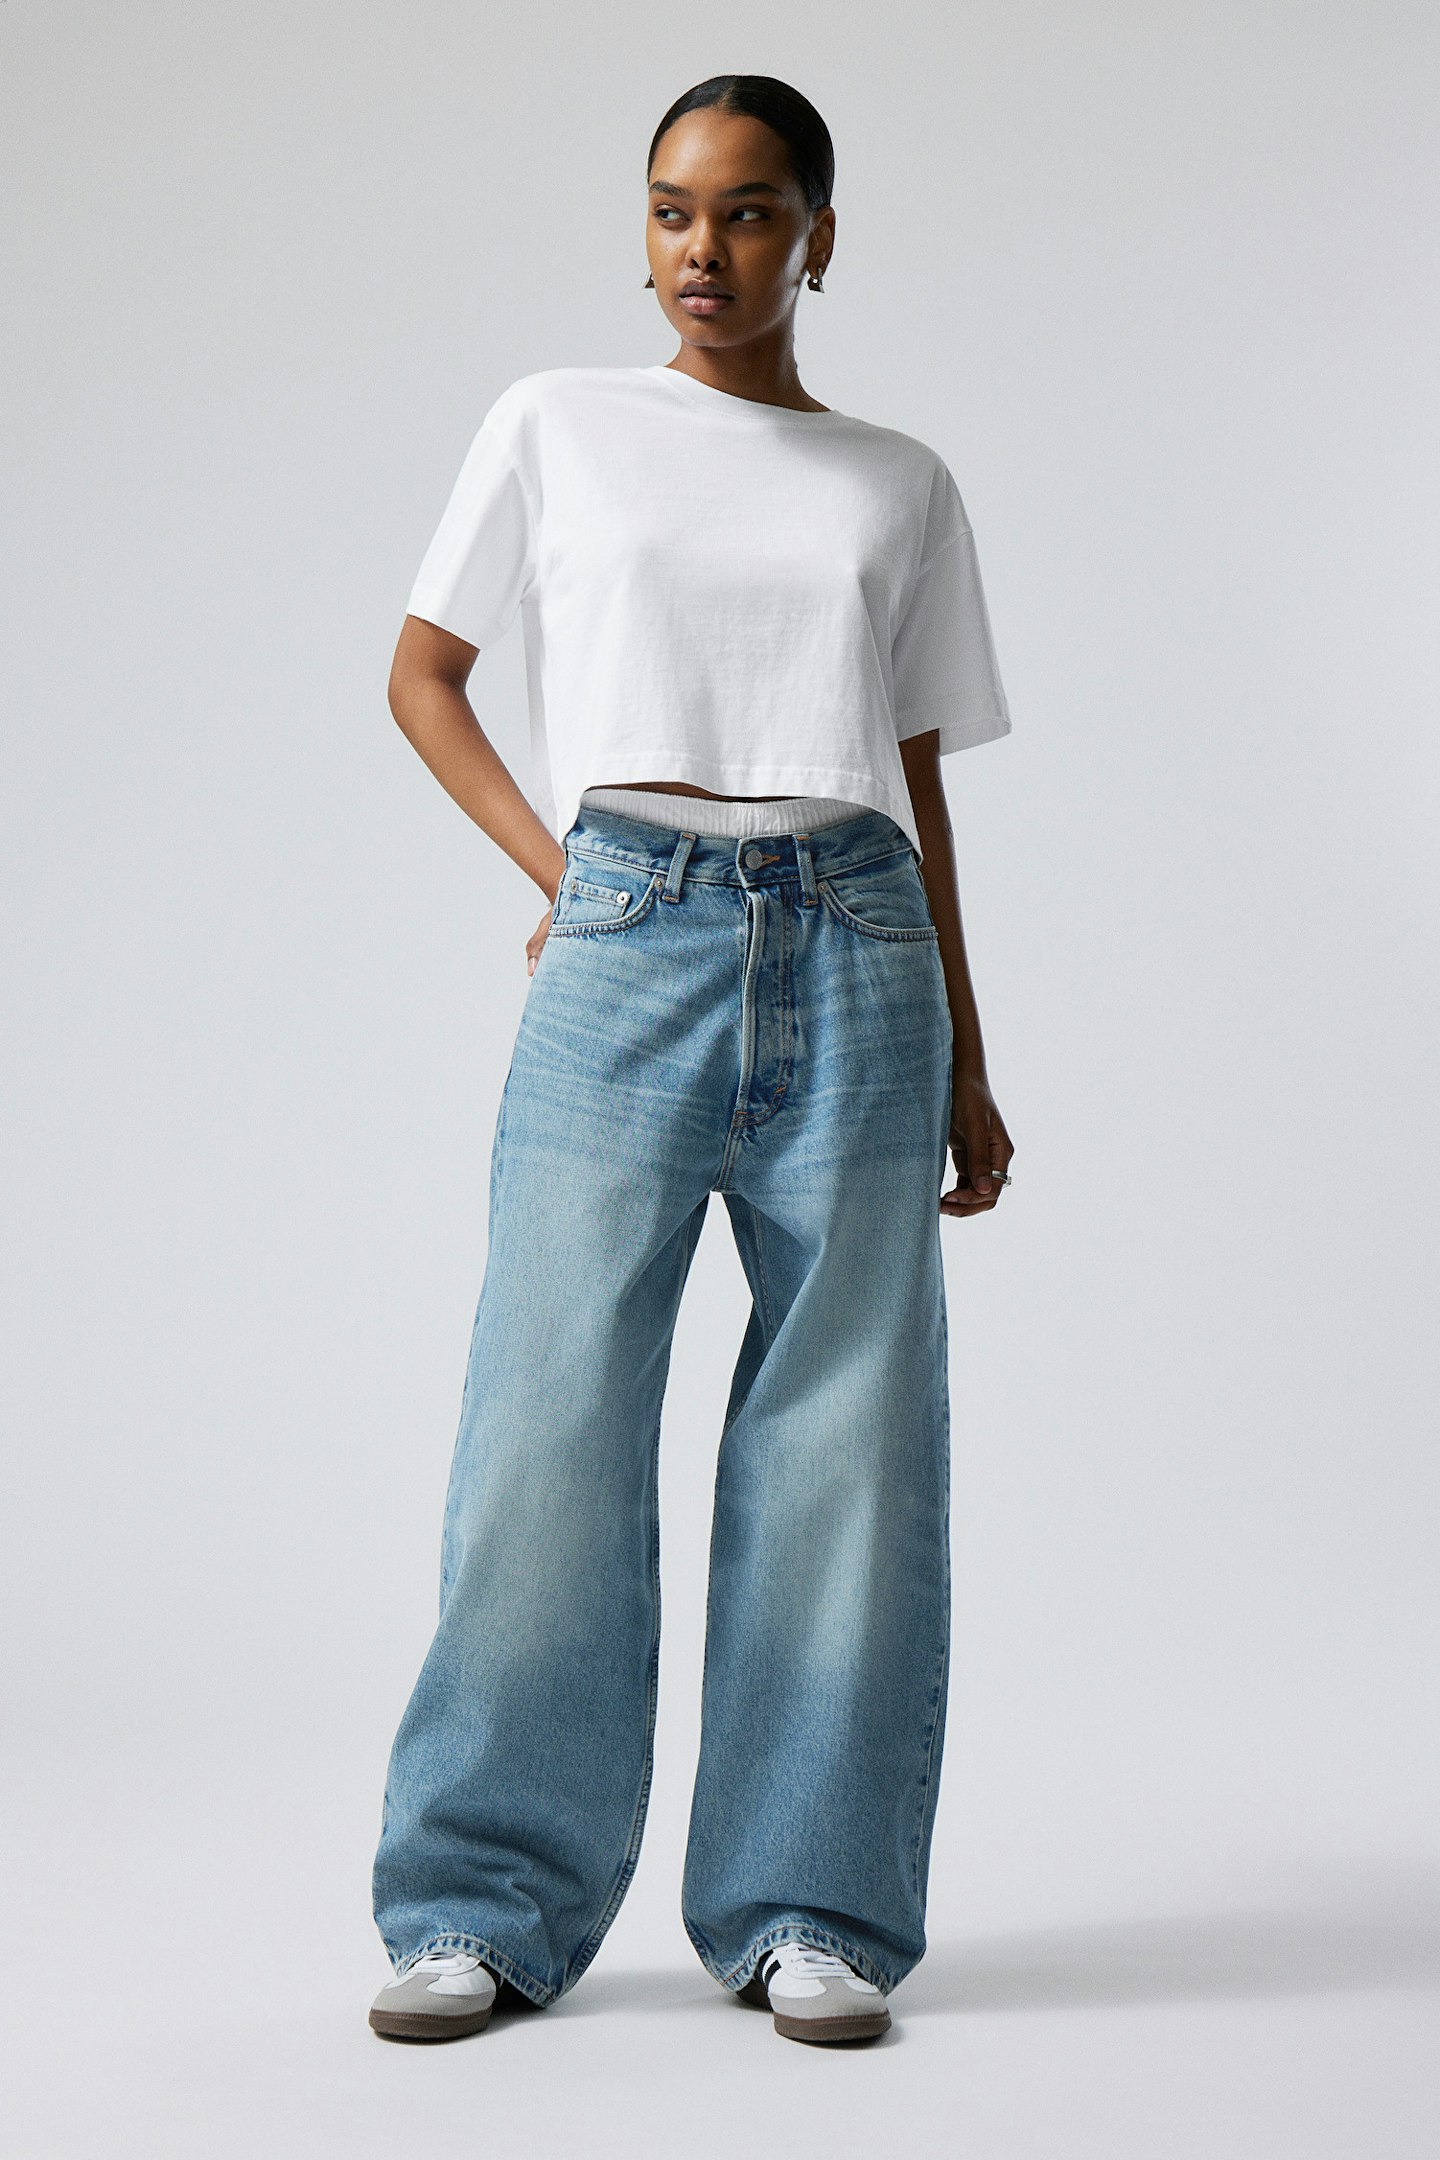 Mellem Kan beregnes evne Weekday's £56 Jeans Are The Most Popular Pair In The World Right Now